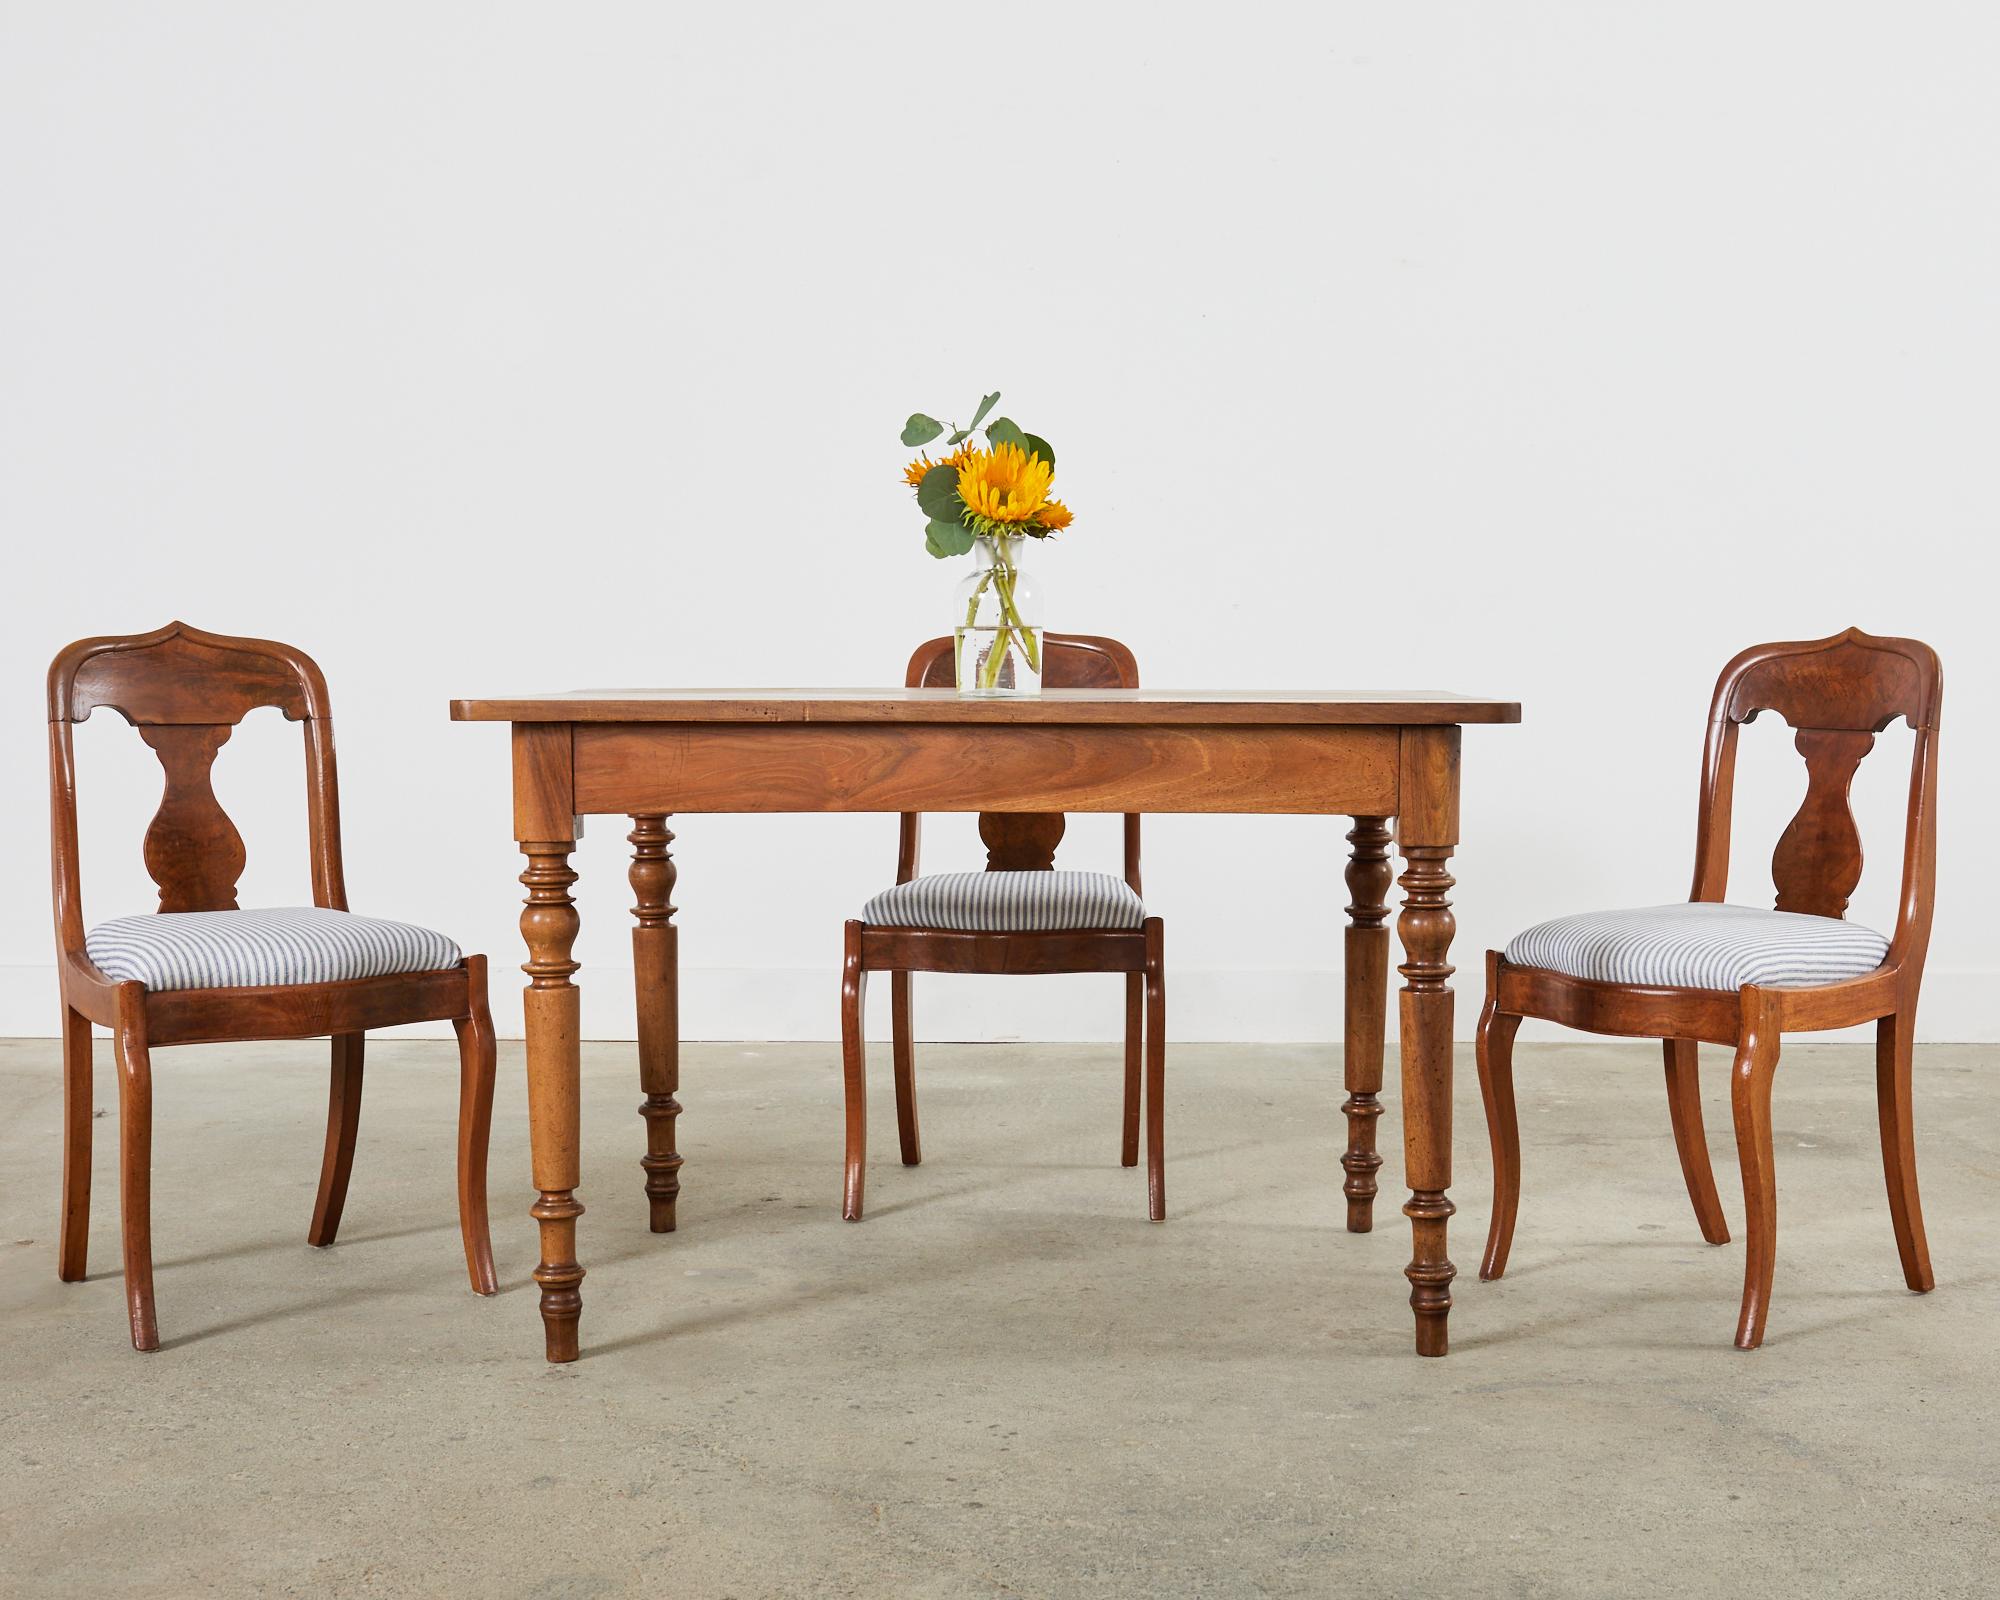 Distinctive set of six 19th century walnut dining chairs made on a slightly diminutive scale. The chairs are crafted from walnut and feature amazing radiant flame veneered seat backs, splats, and apron. The chair frames have a subtle gondola style